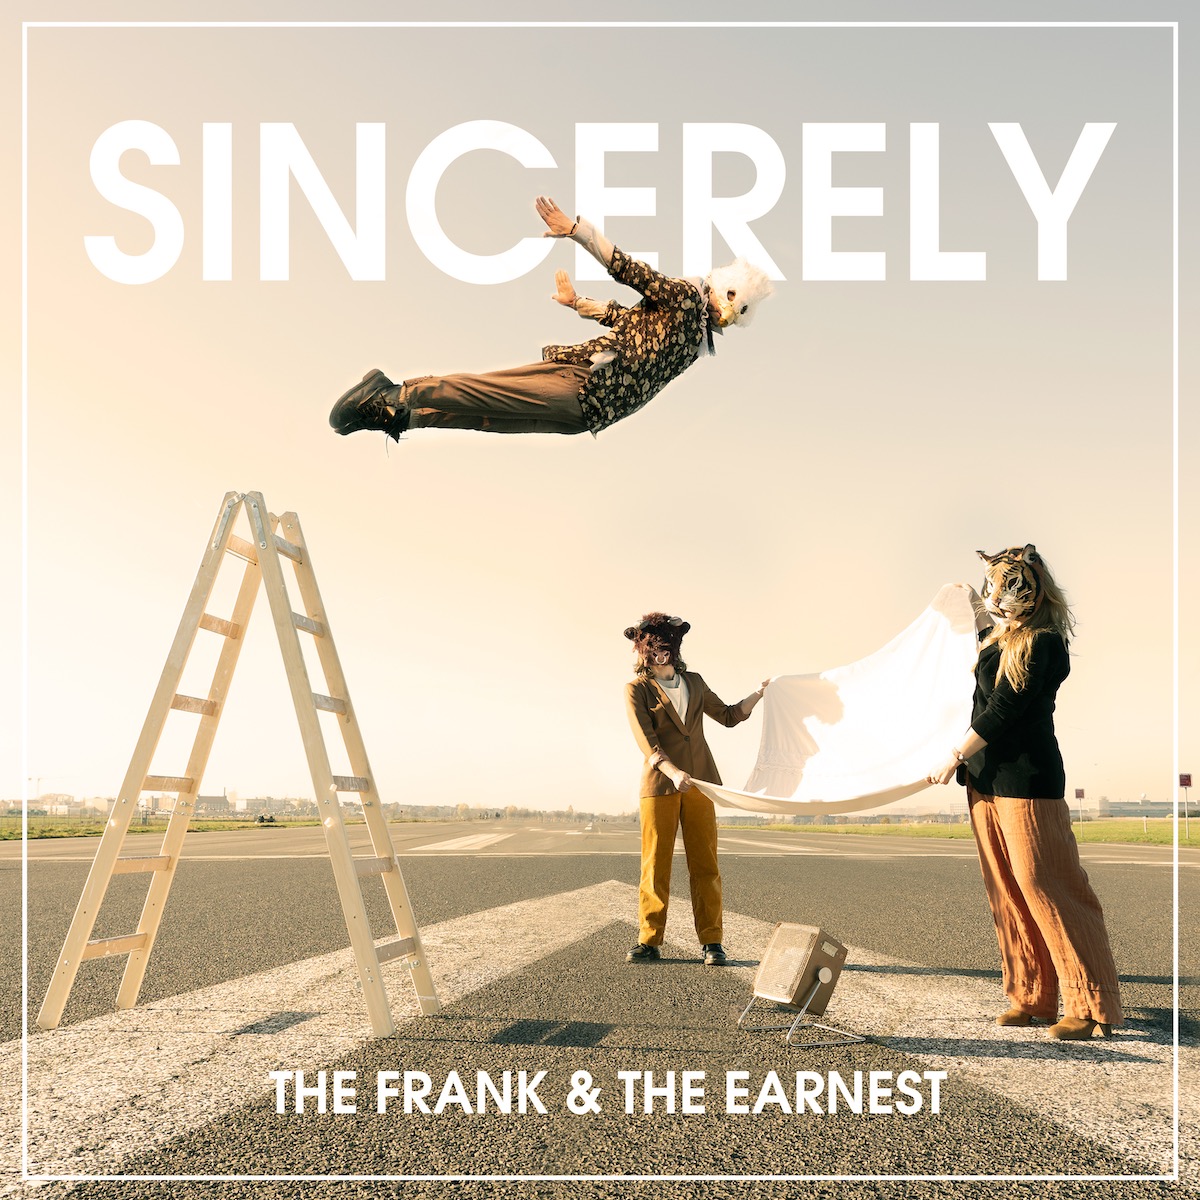 SINCERELRY by The Frank & The Earnest